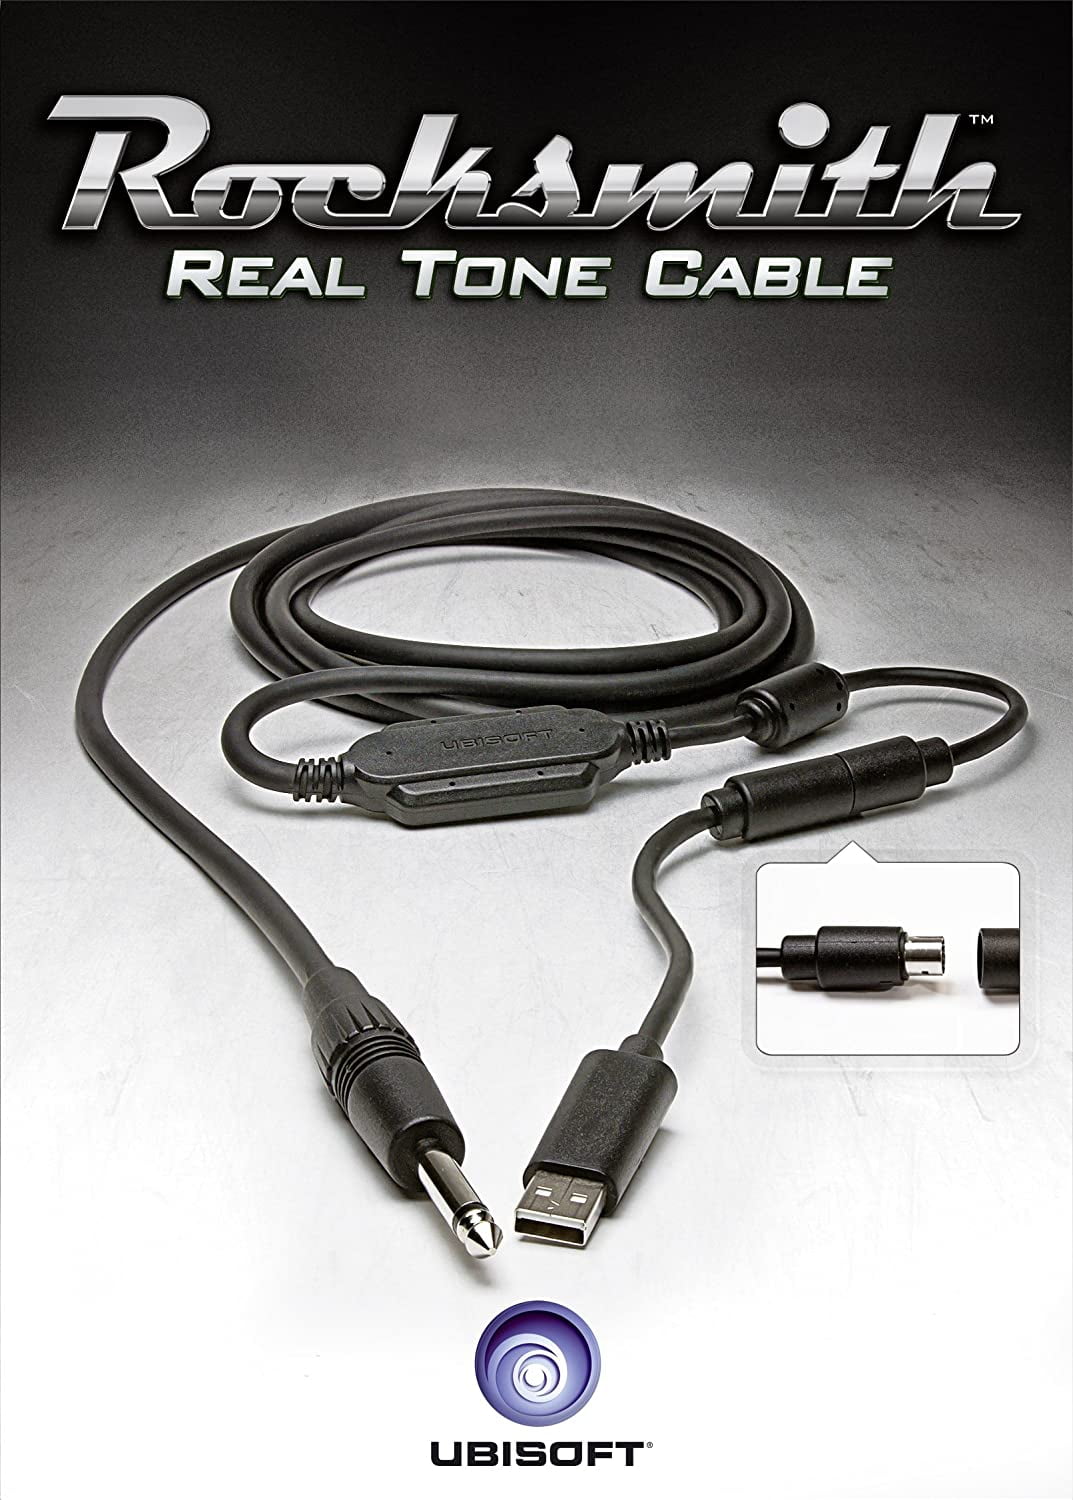 rocksmith real tone cable code 10